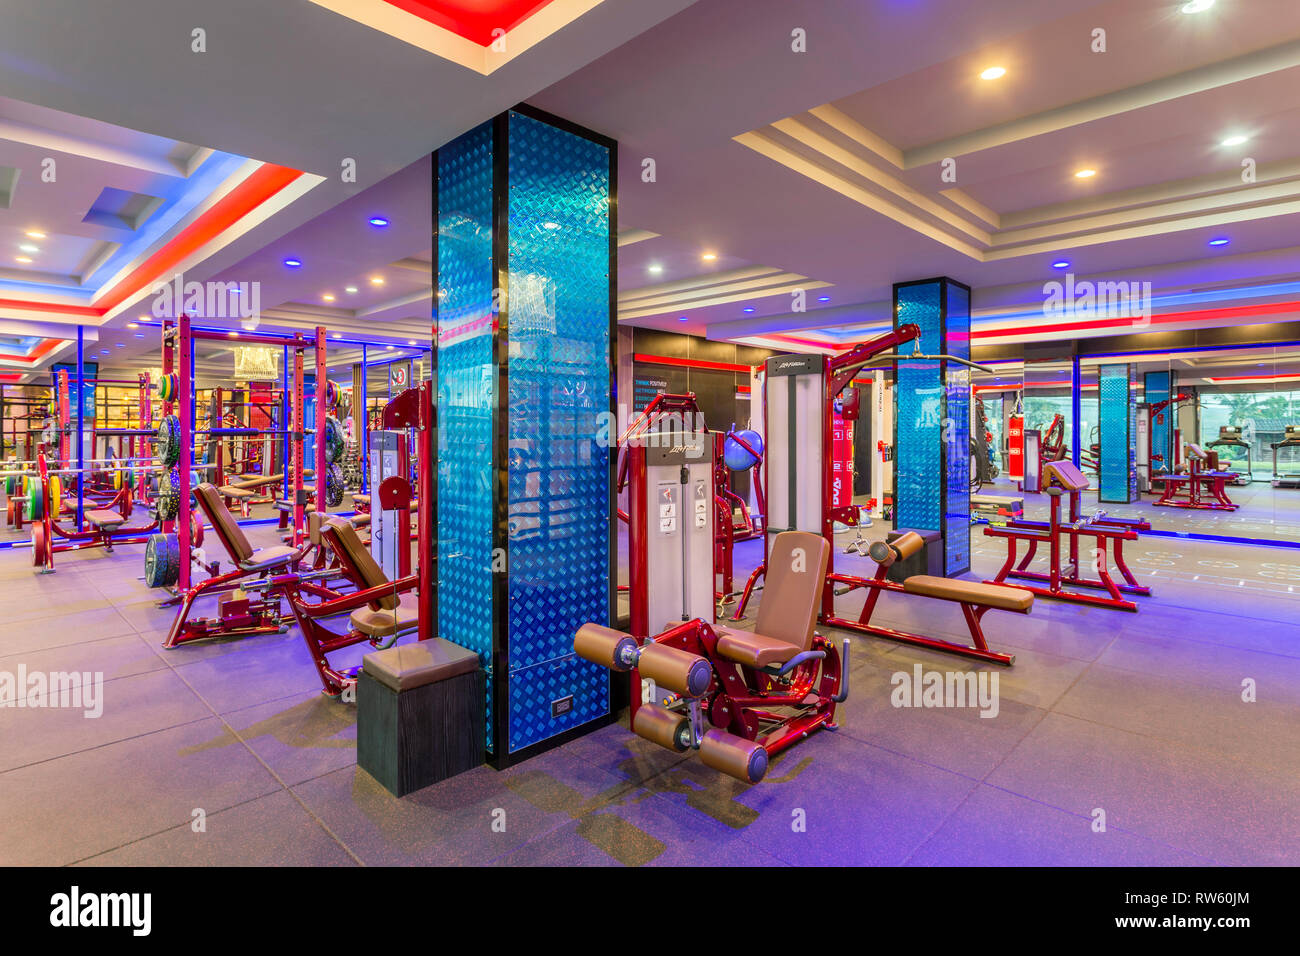 GM Life Fitness health club interior room filled with fitness equipment and exercise machine in Krabi, Thailand. Stock Photo